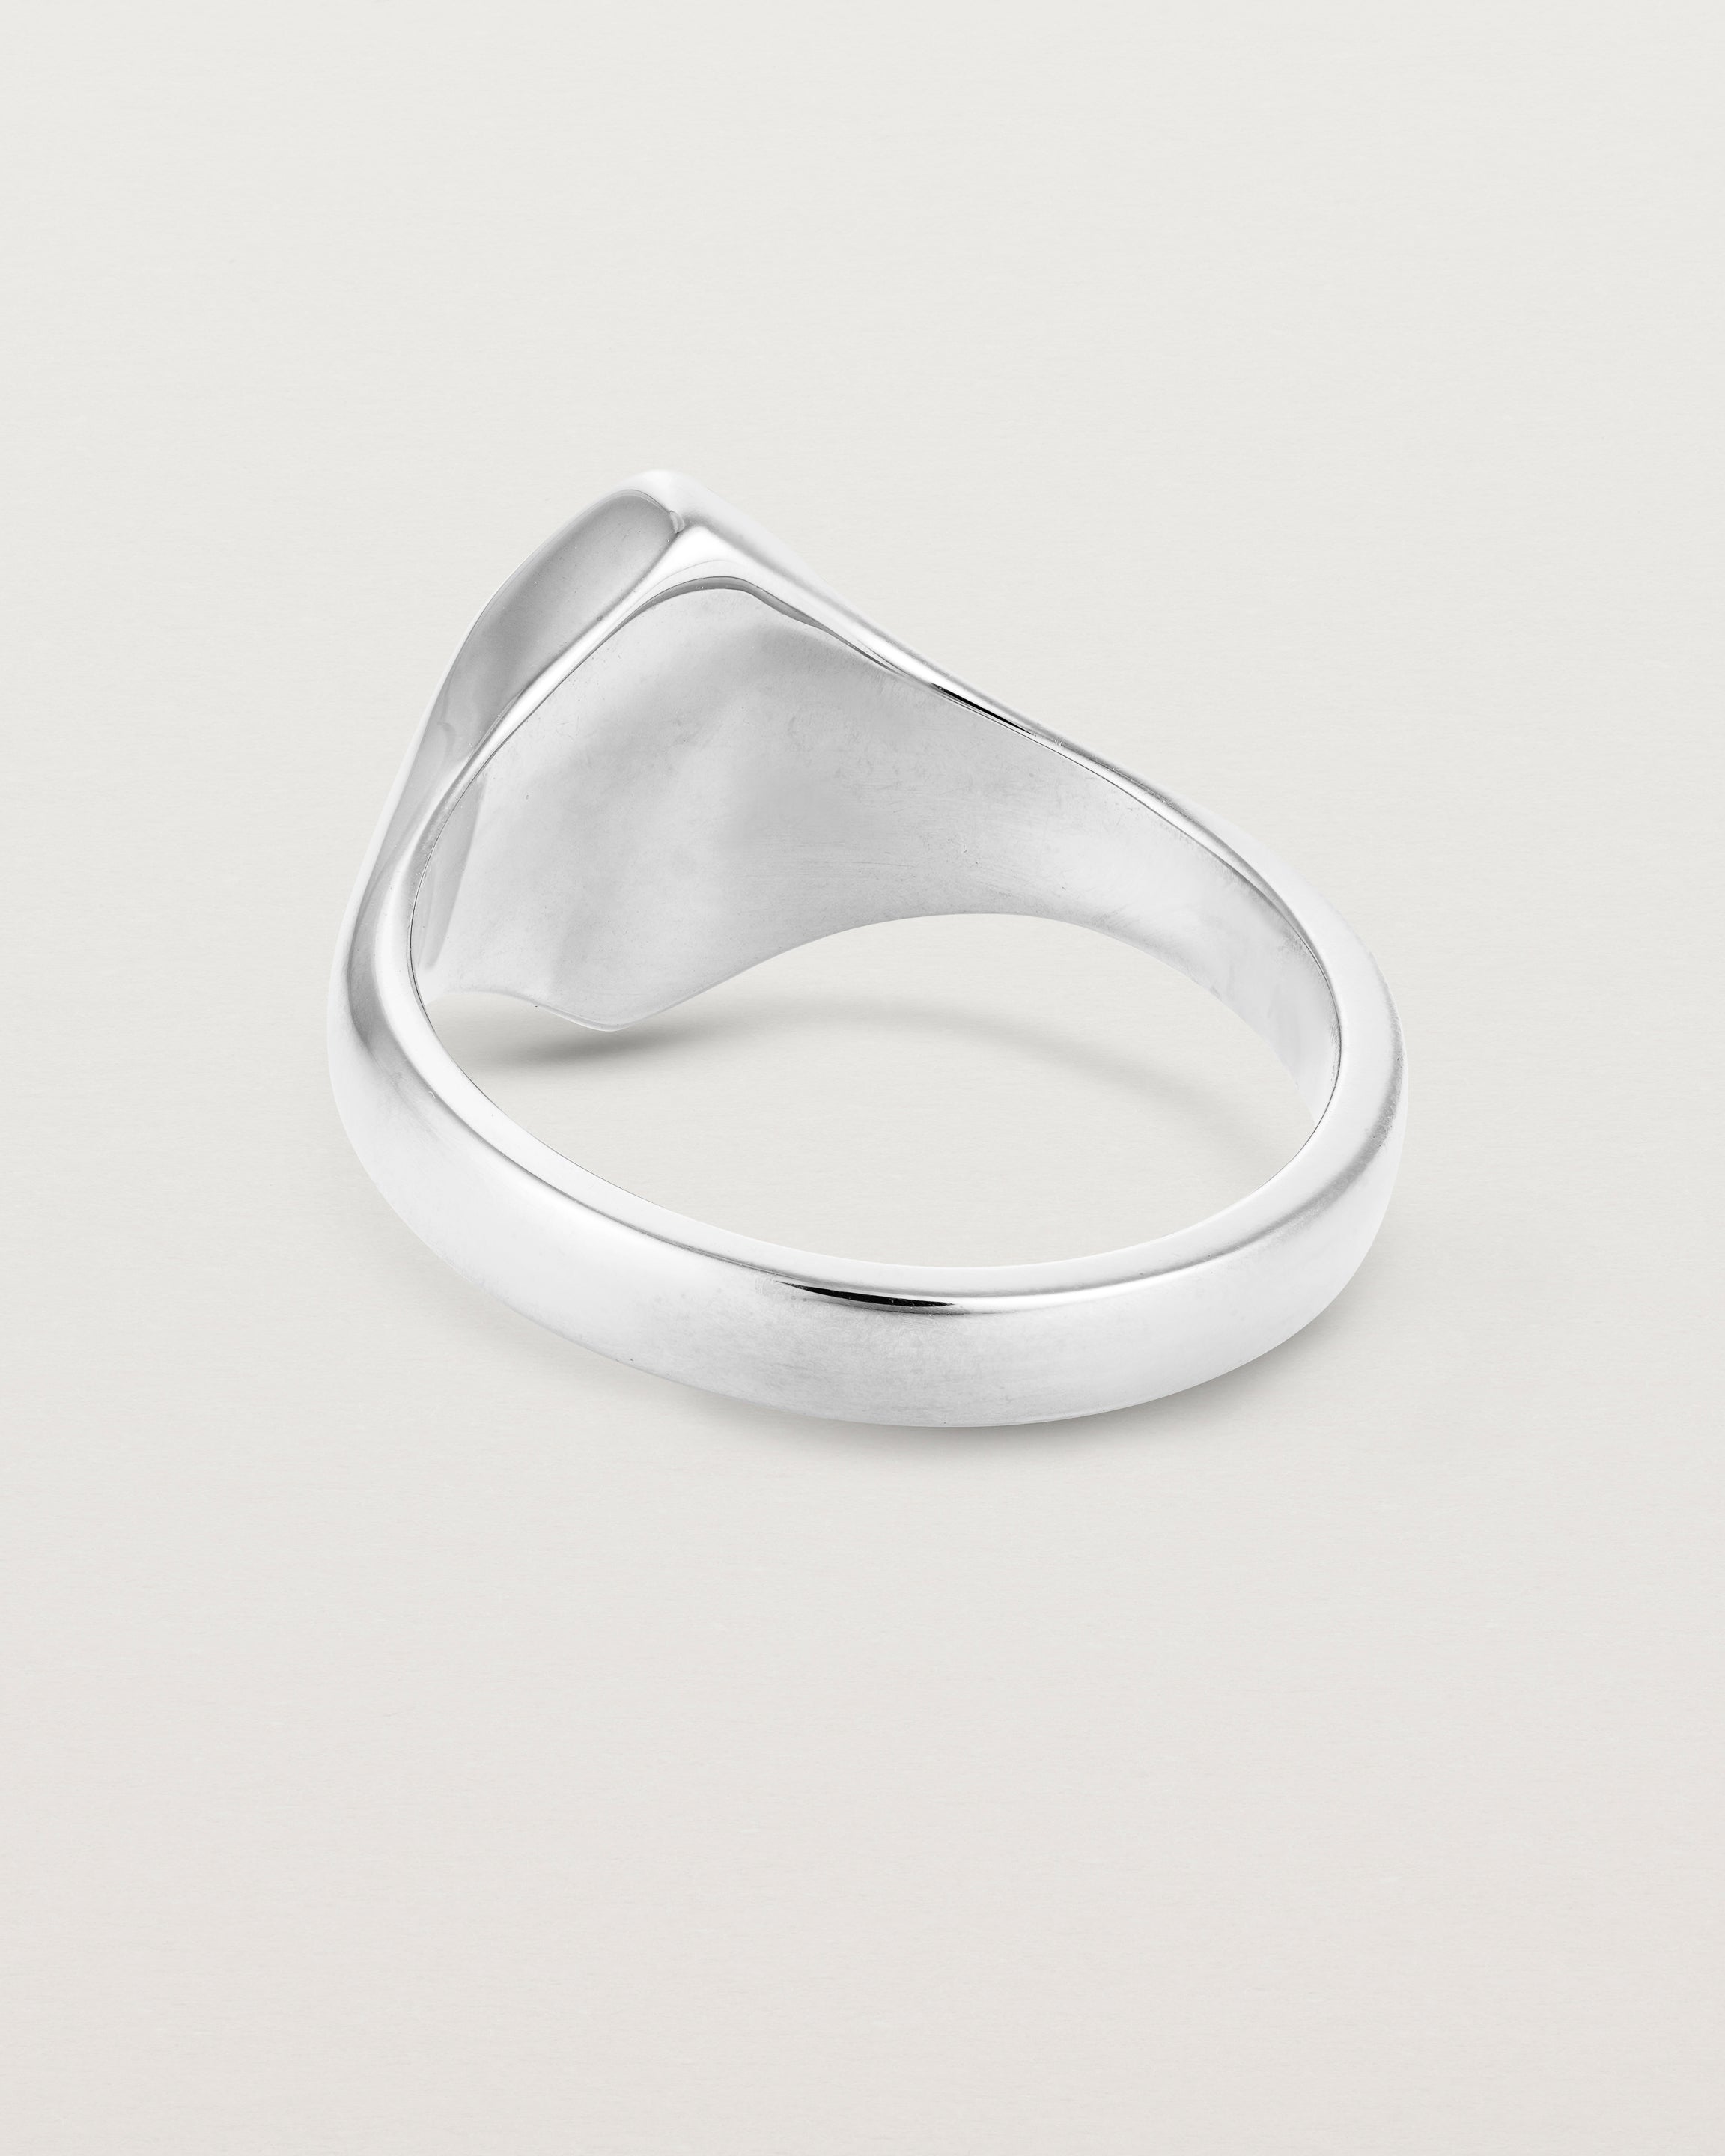 Back view of the Willow Signet Ring in white gold.